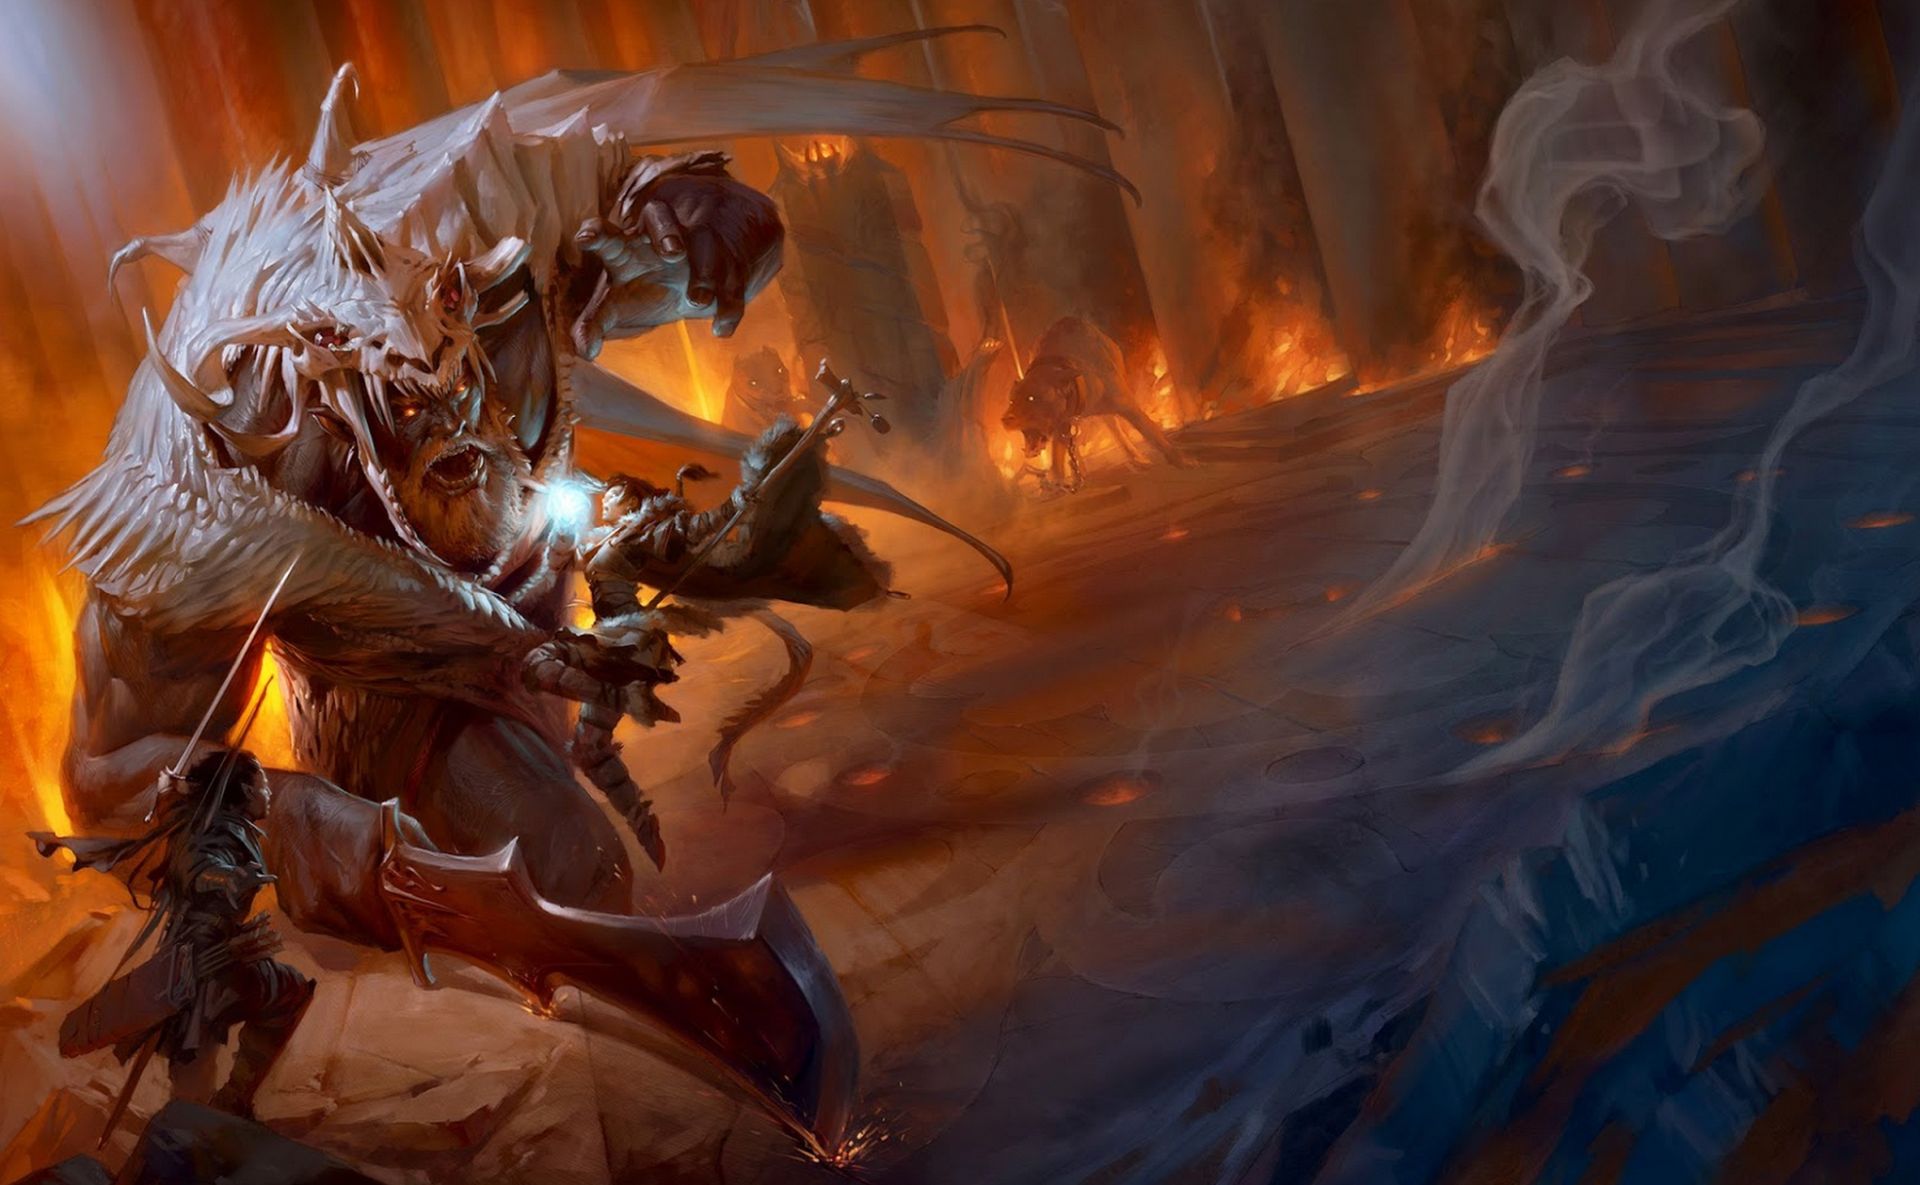 Unearthed Arcana Review: Revived Rogue – Mythcreants